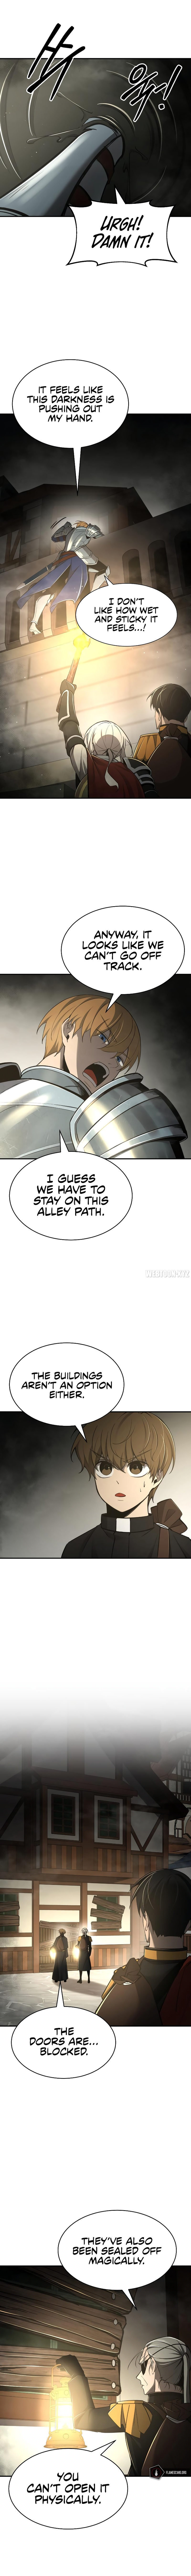 tyrant-of-the-tower-defense-game-chap-39-13